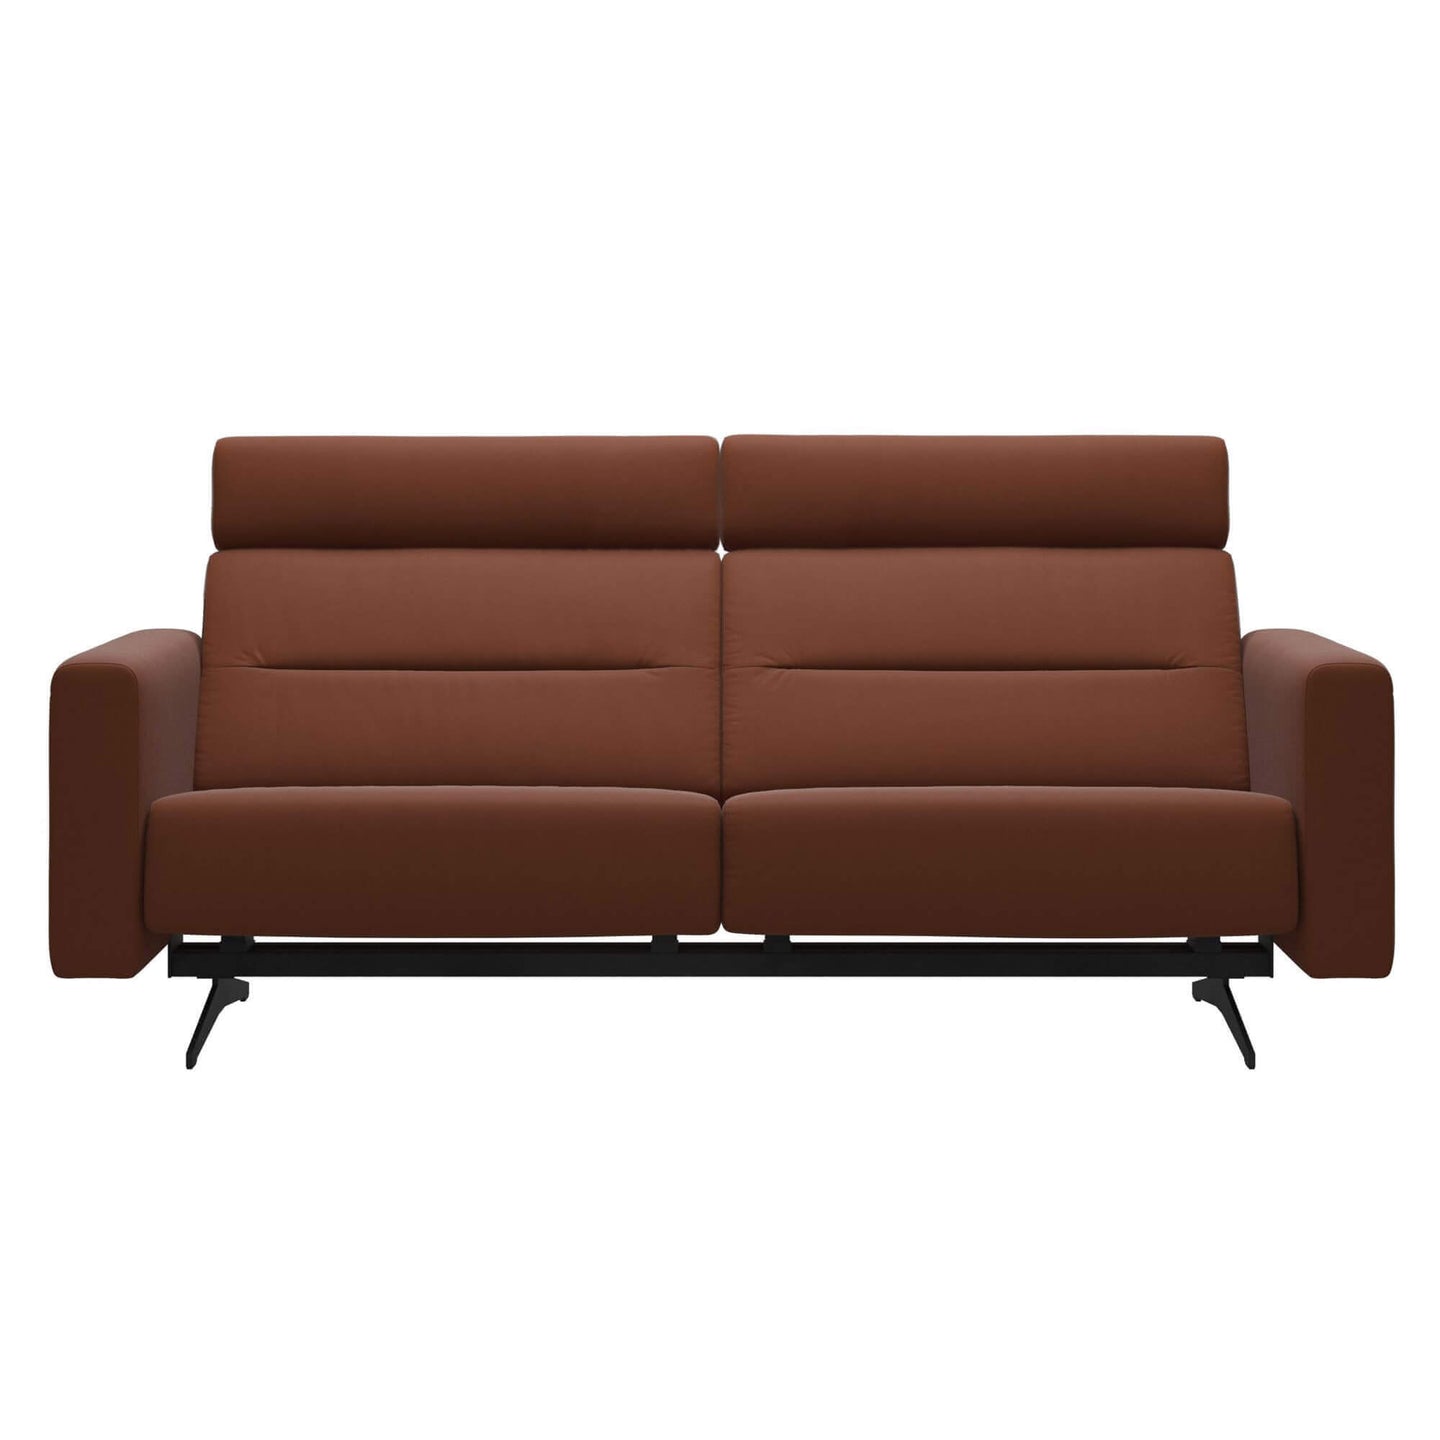 Stressless 2.5 Seater Stella Sofa With 2 Headrests In Paloma Copper - Black Feet